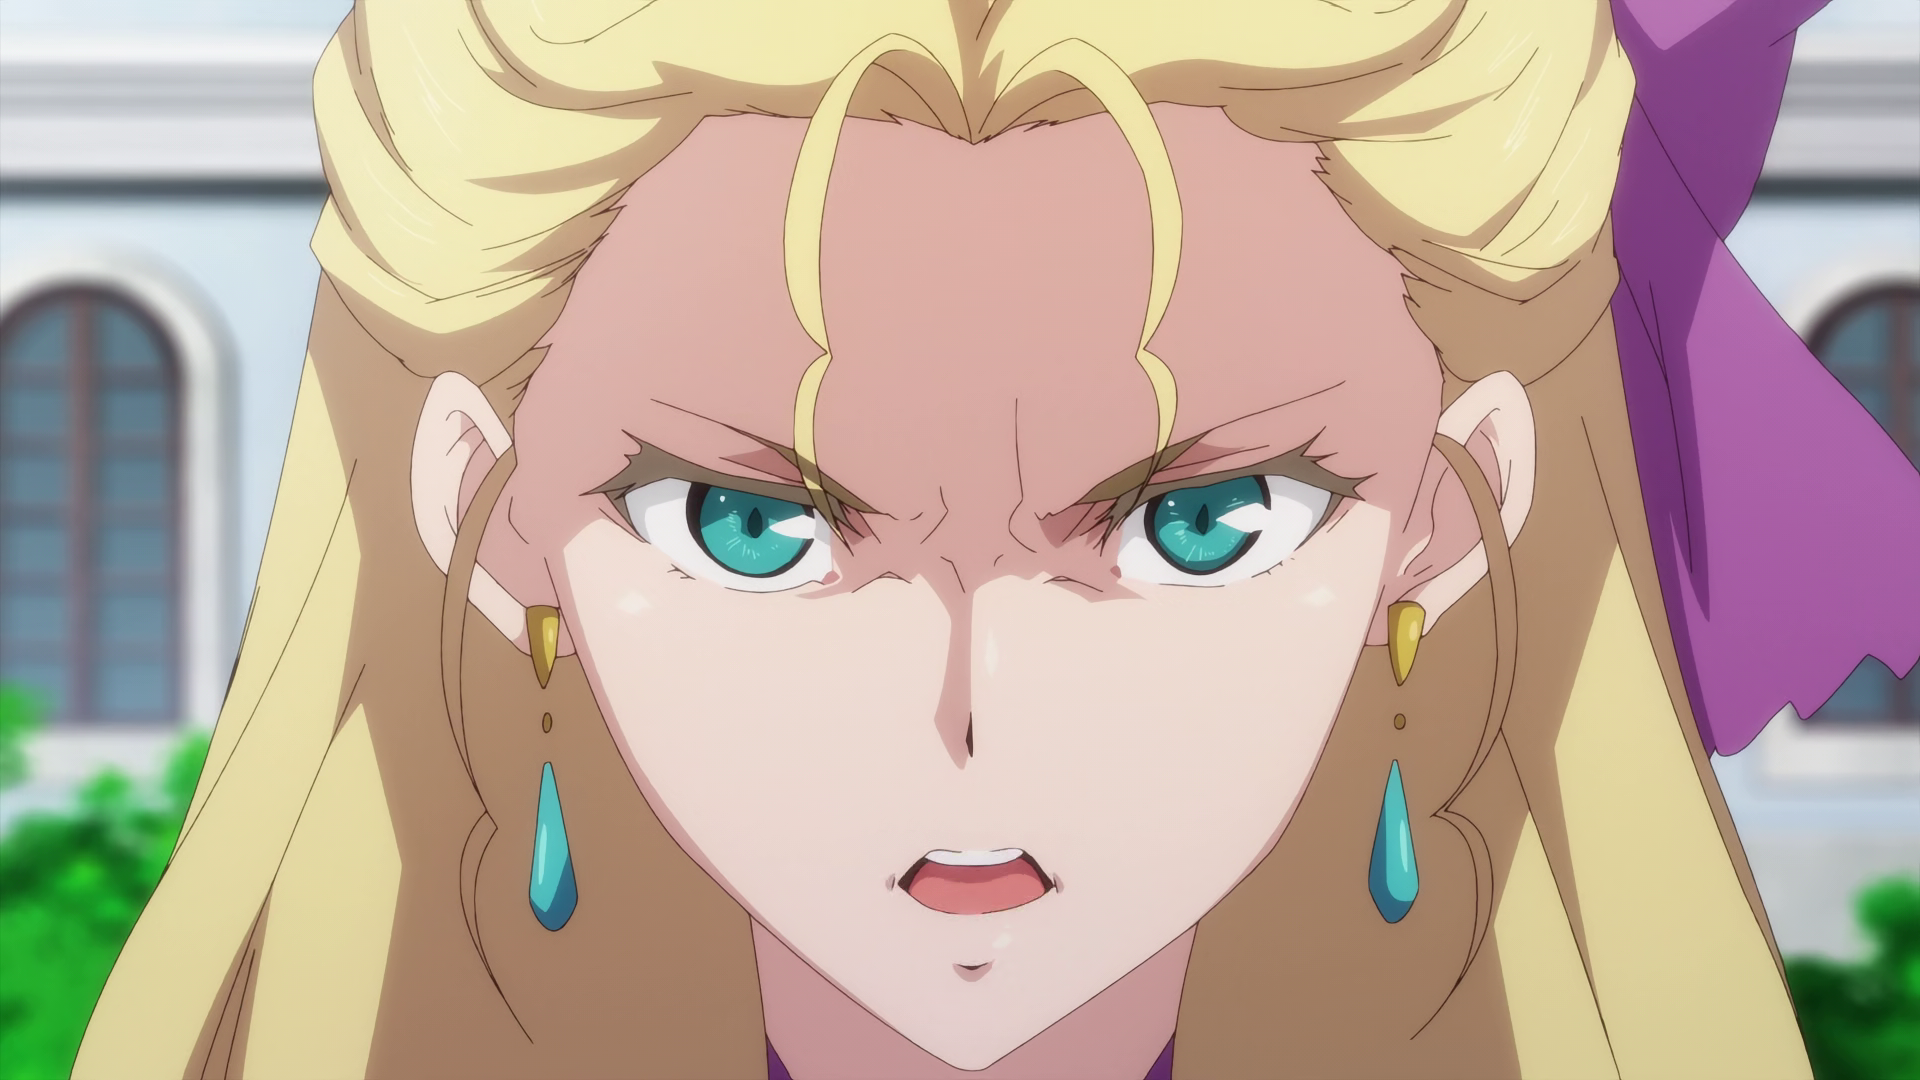 Anime 1920x1080 Anime screenshot blue eyes The Saint's Magic Power Is Omnipotent open mouth violet ribbon blonde Elizabeth Ashley anime girls anime face angry earring